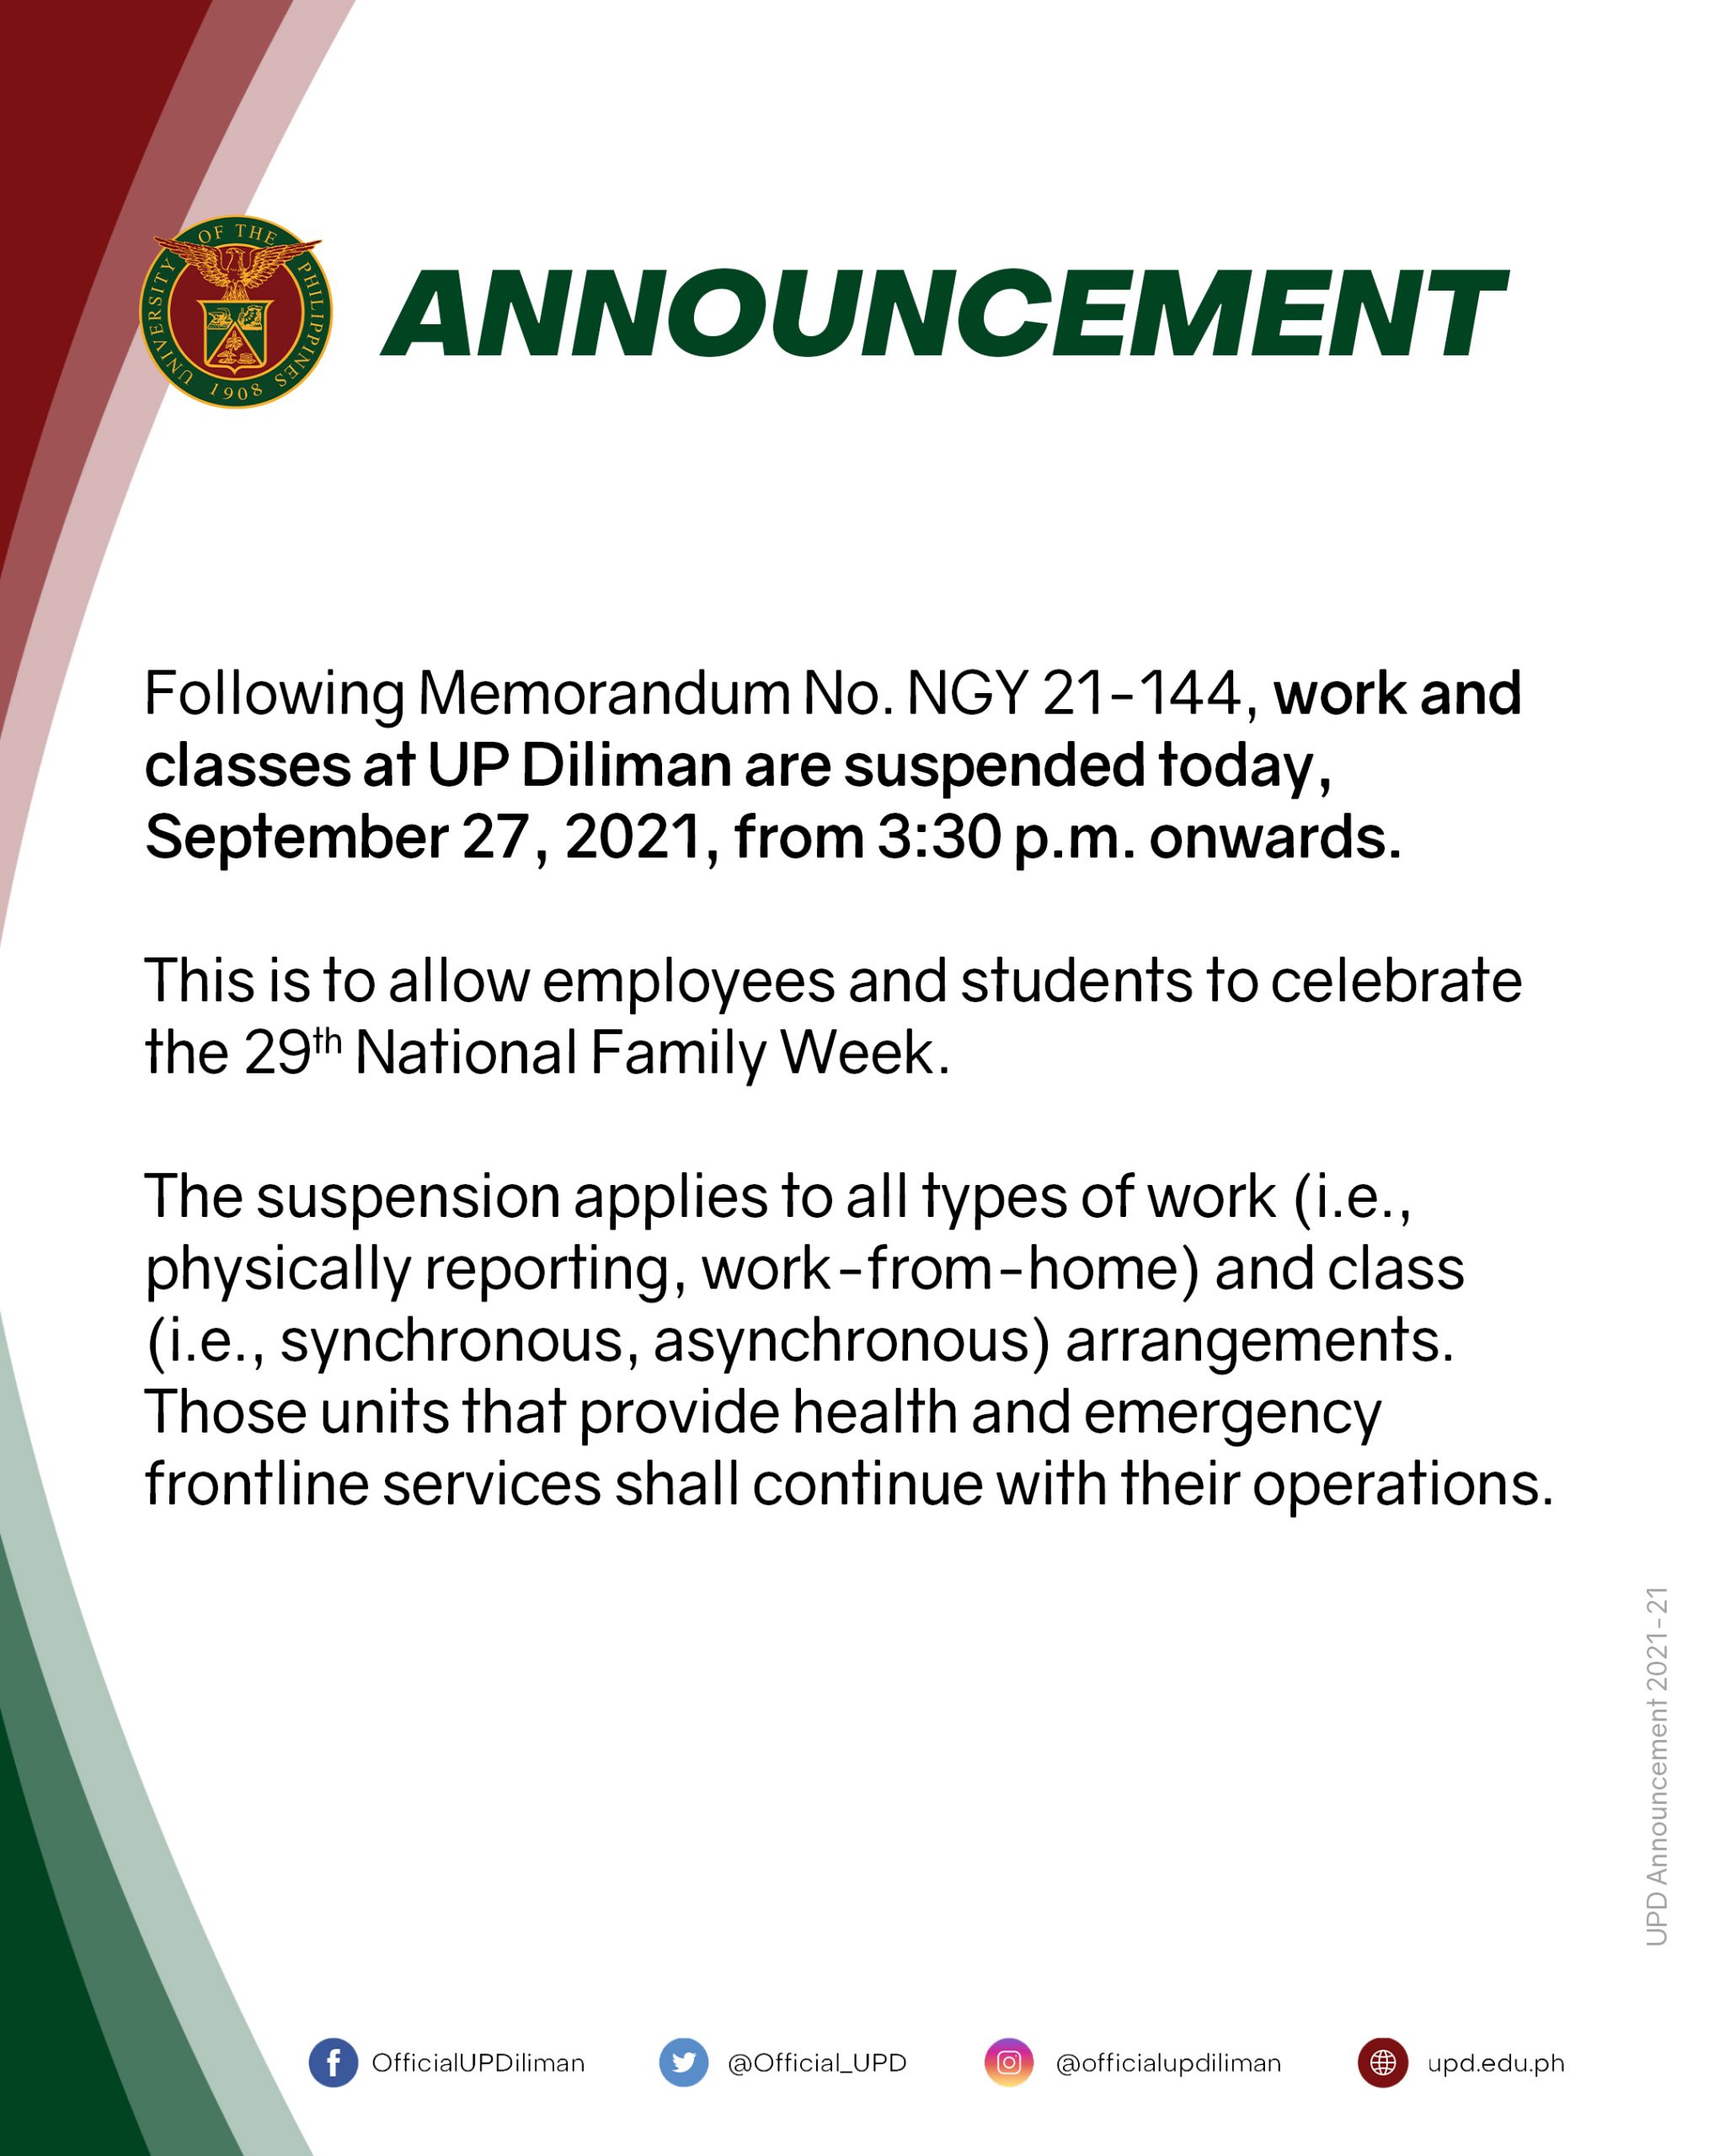 Work and classes are suspended today, September 27, 2021, from 3